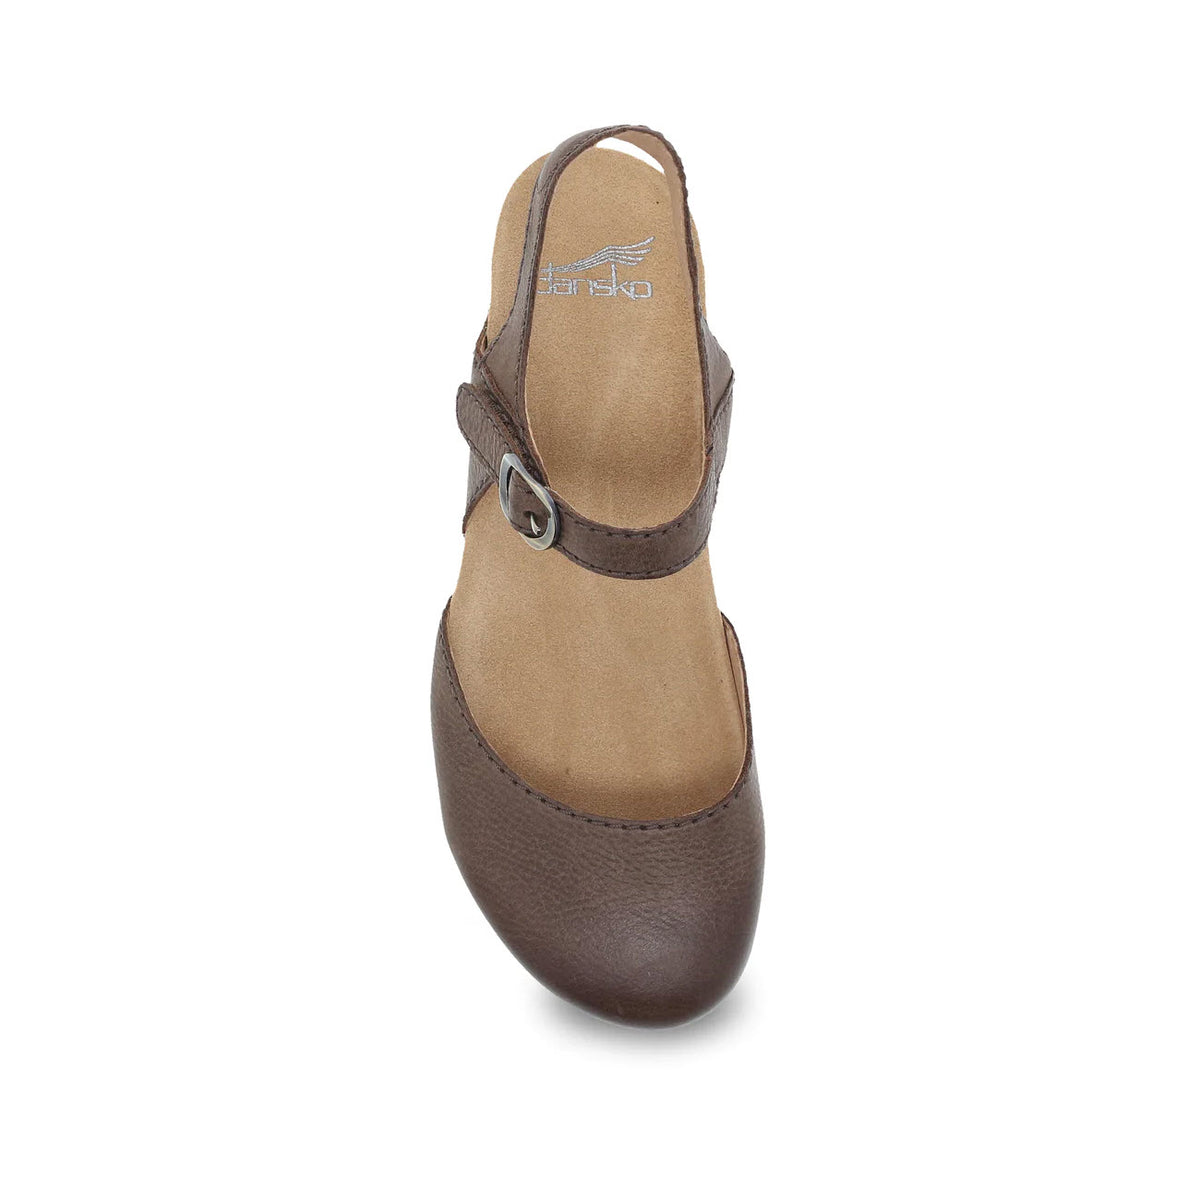 Dansko Tiffani brown mary jane style closed toe sandal with a strap over the instep on a white background.